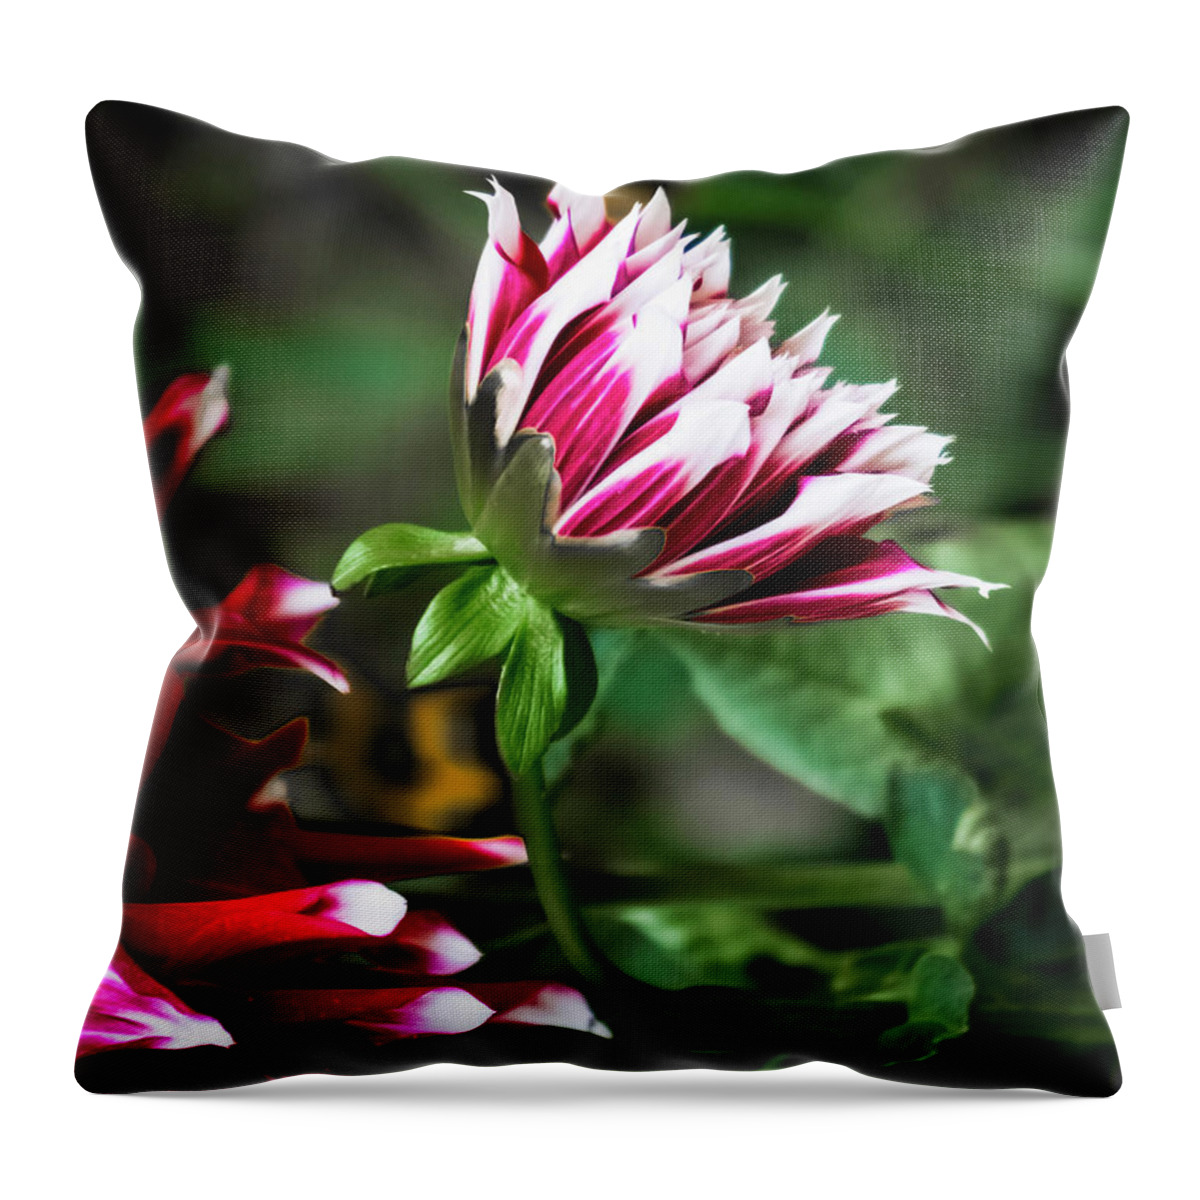 Outdoors Throw Pillow featuring the photograph Emerging dahlia by Silvia Marcoschamer